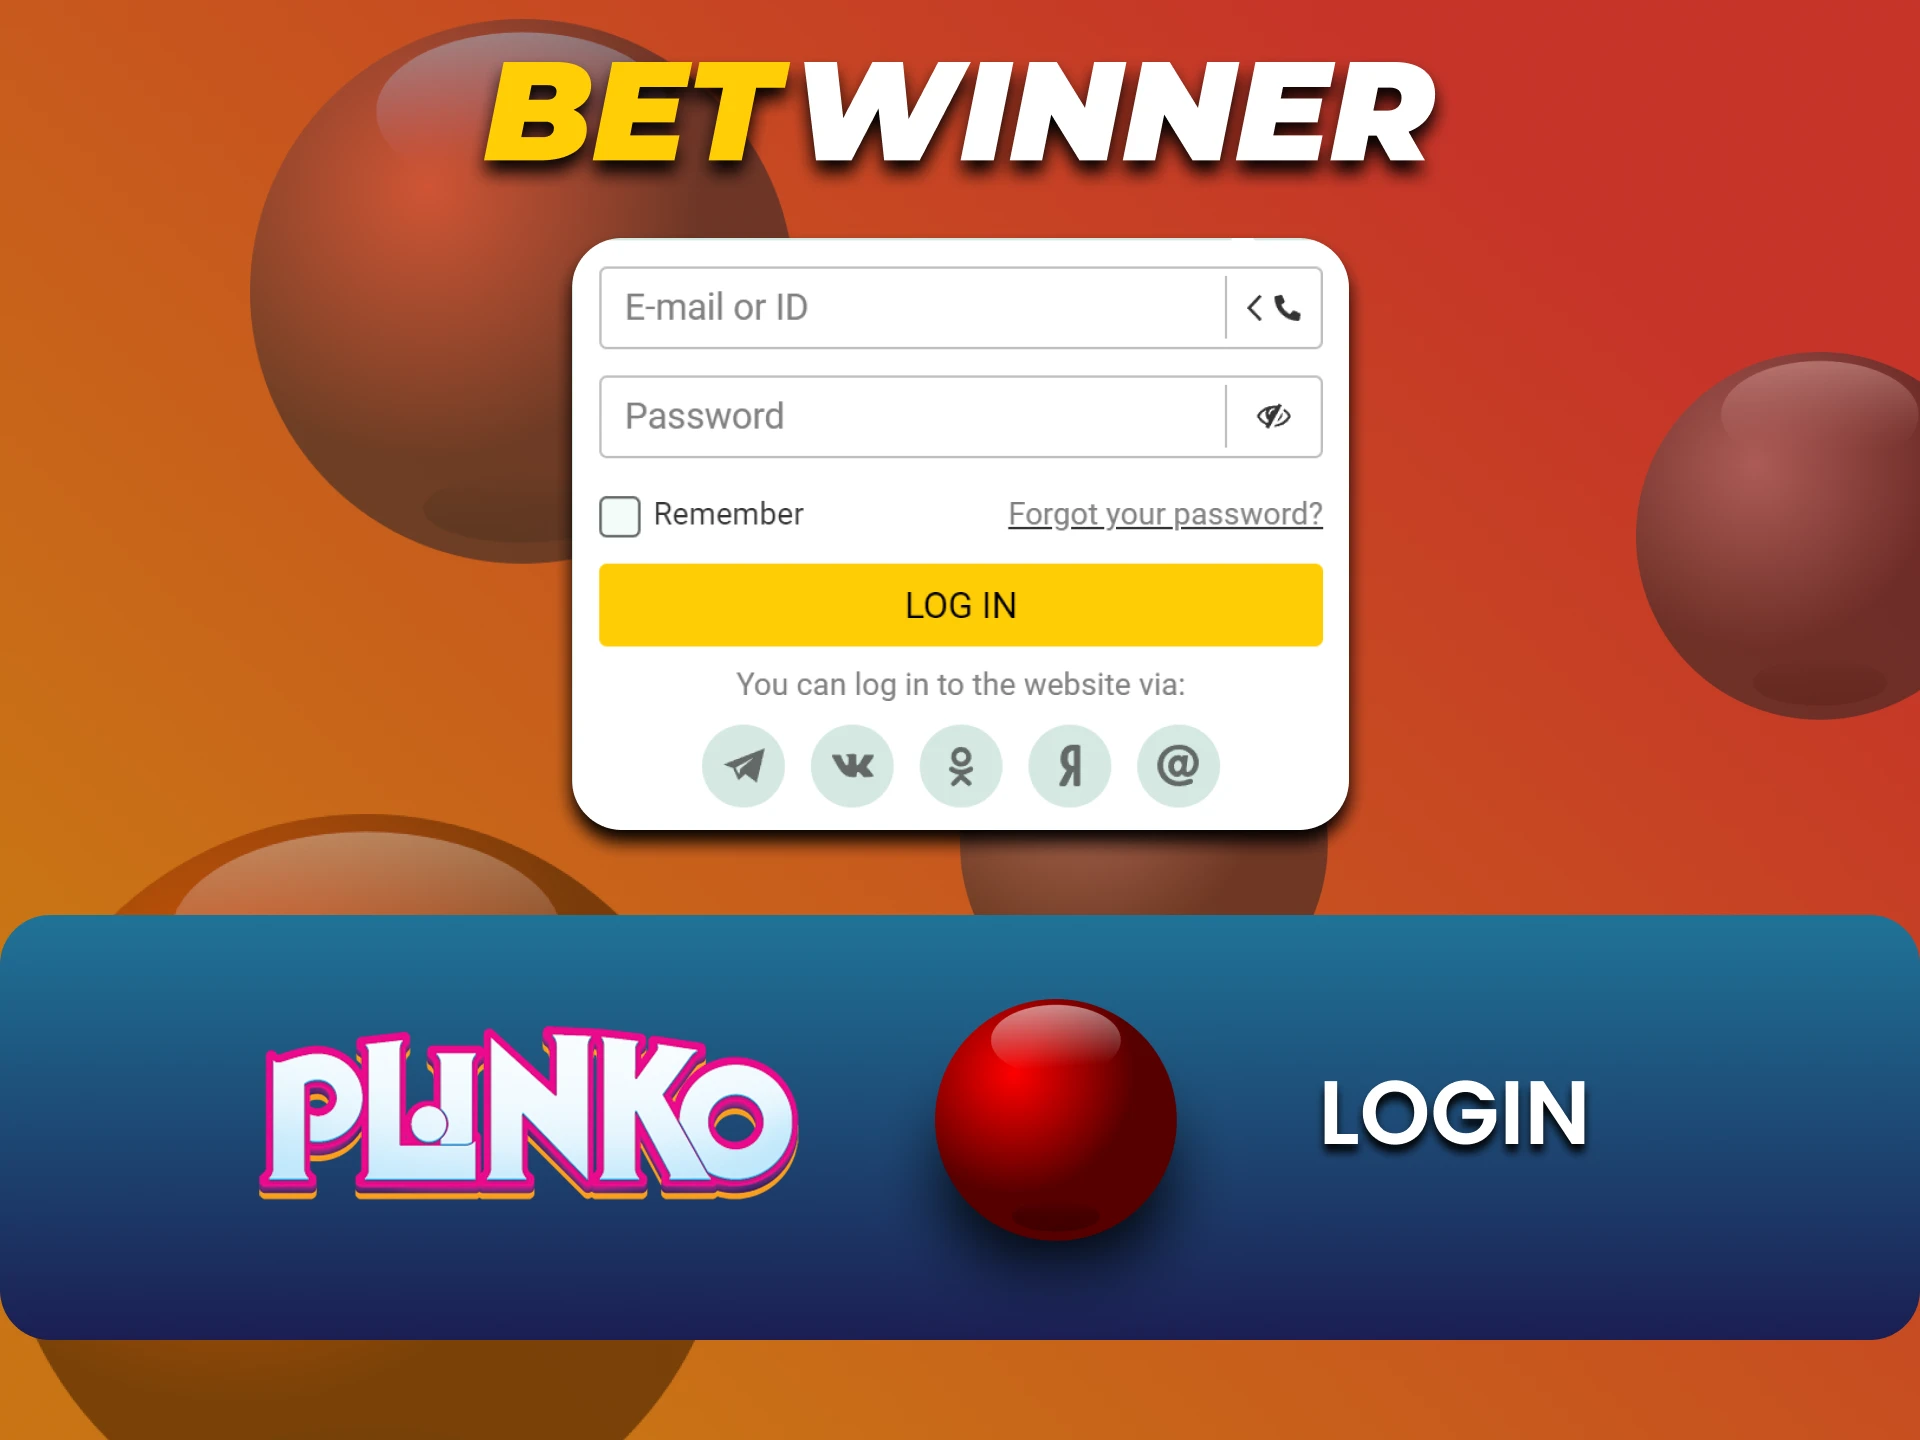 Log in to your personal Betwinner account to play Plinko.